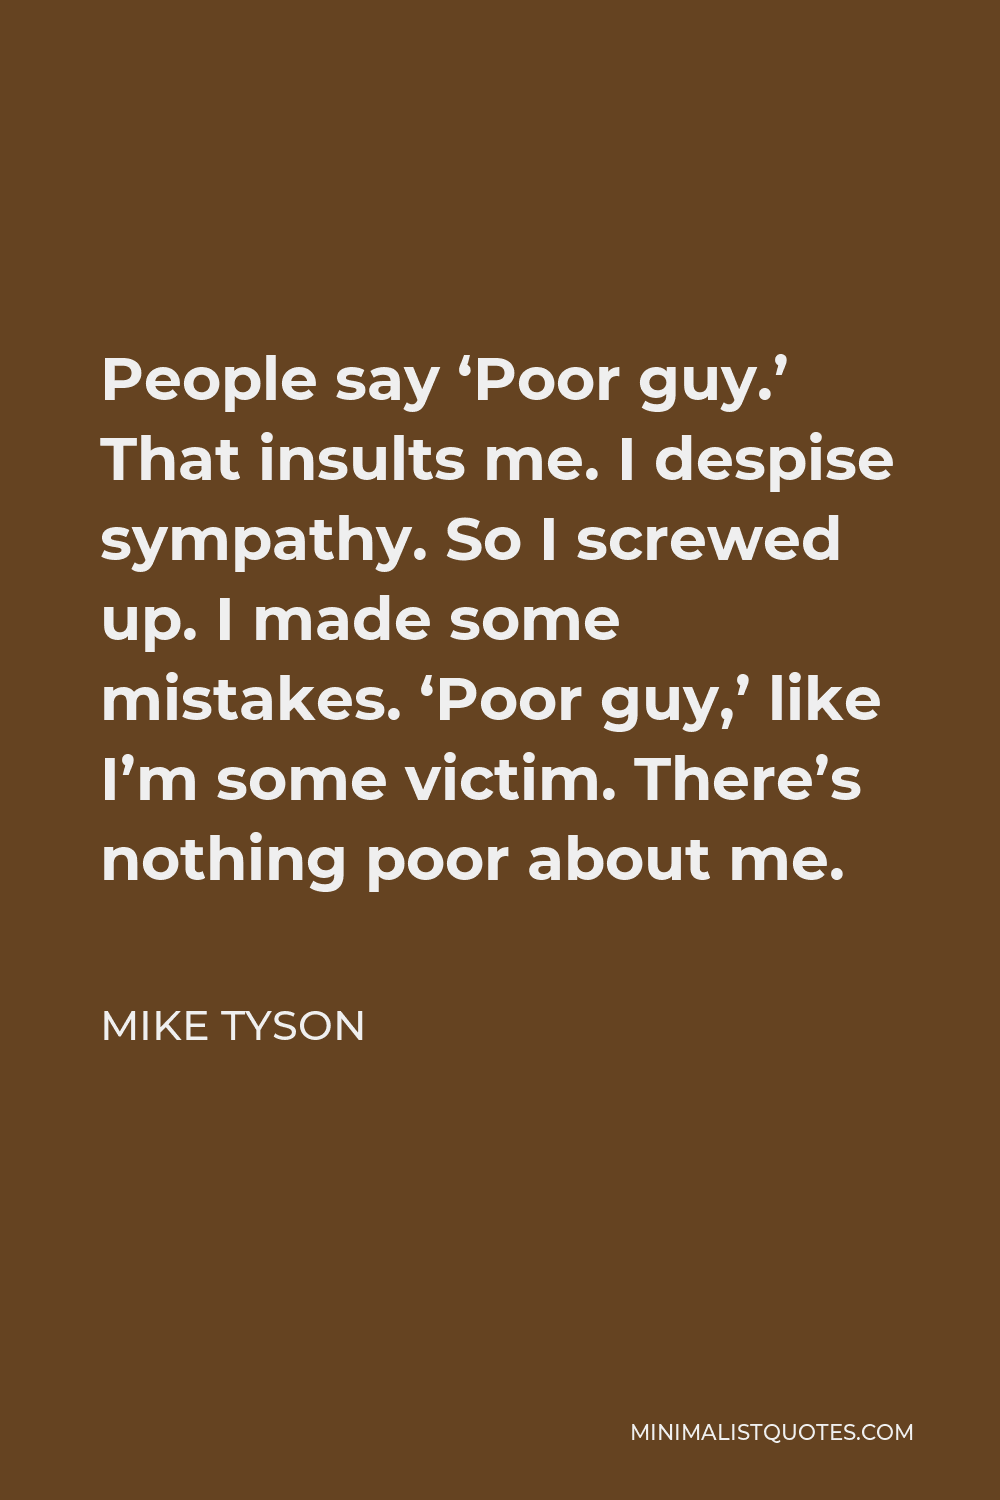 Mike Tyson Quote - People say ‘Poor guy.’ That insults me. I despise sympathy. So I screwed up. I made some mistakes. ‘Poor guy,’ like I’m some victim. There’s nothing poor about me.